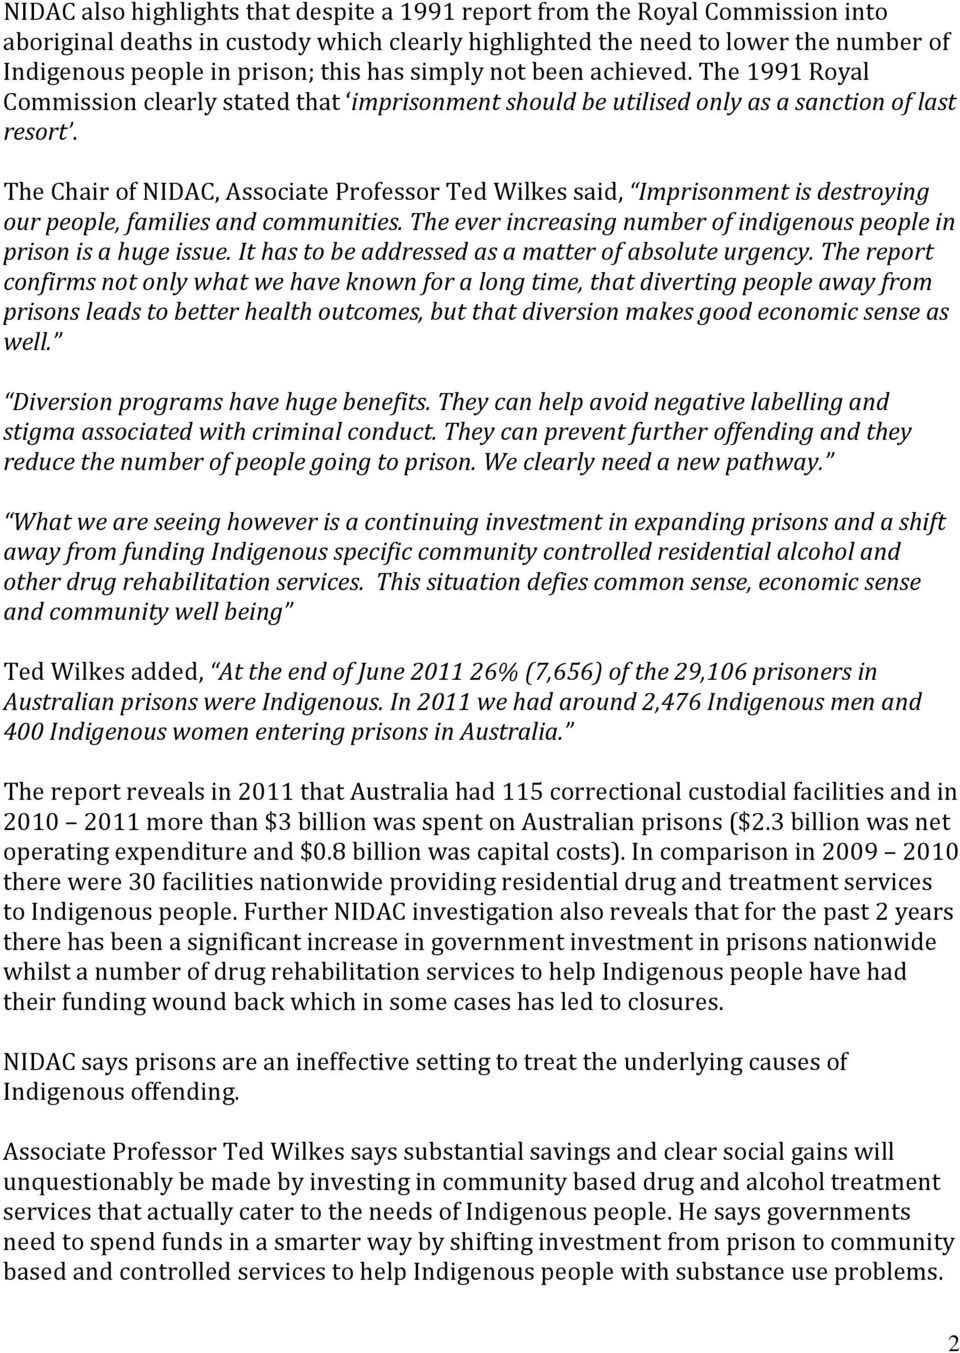 The Chair of NIDAC, Associate Professor Ted Wilkes said, Imprisonment is destroying our people, families and communities. The ever increasing number of indigenous people in prison is a huge issue.